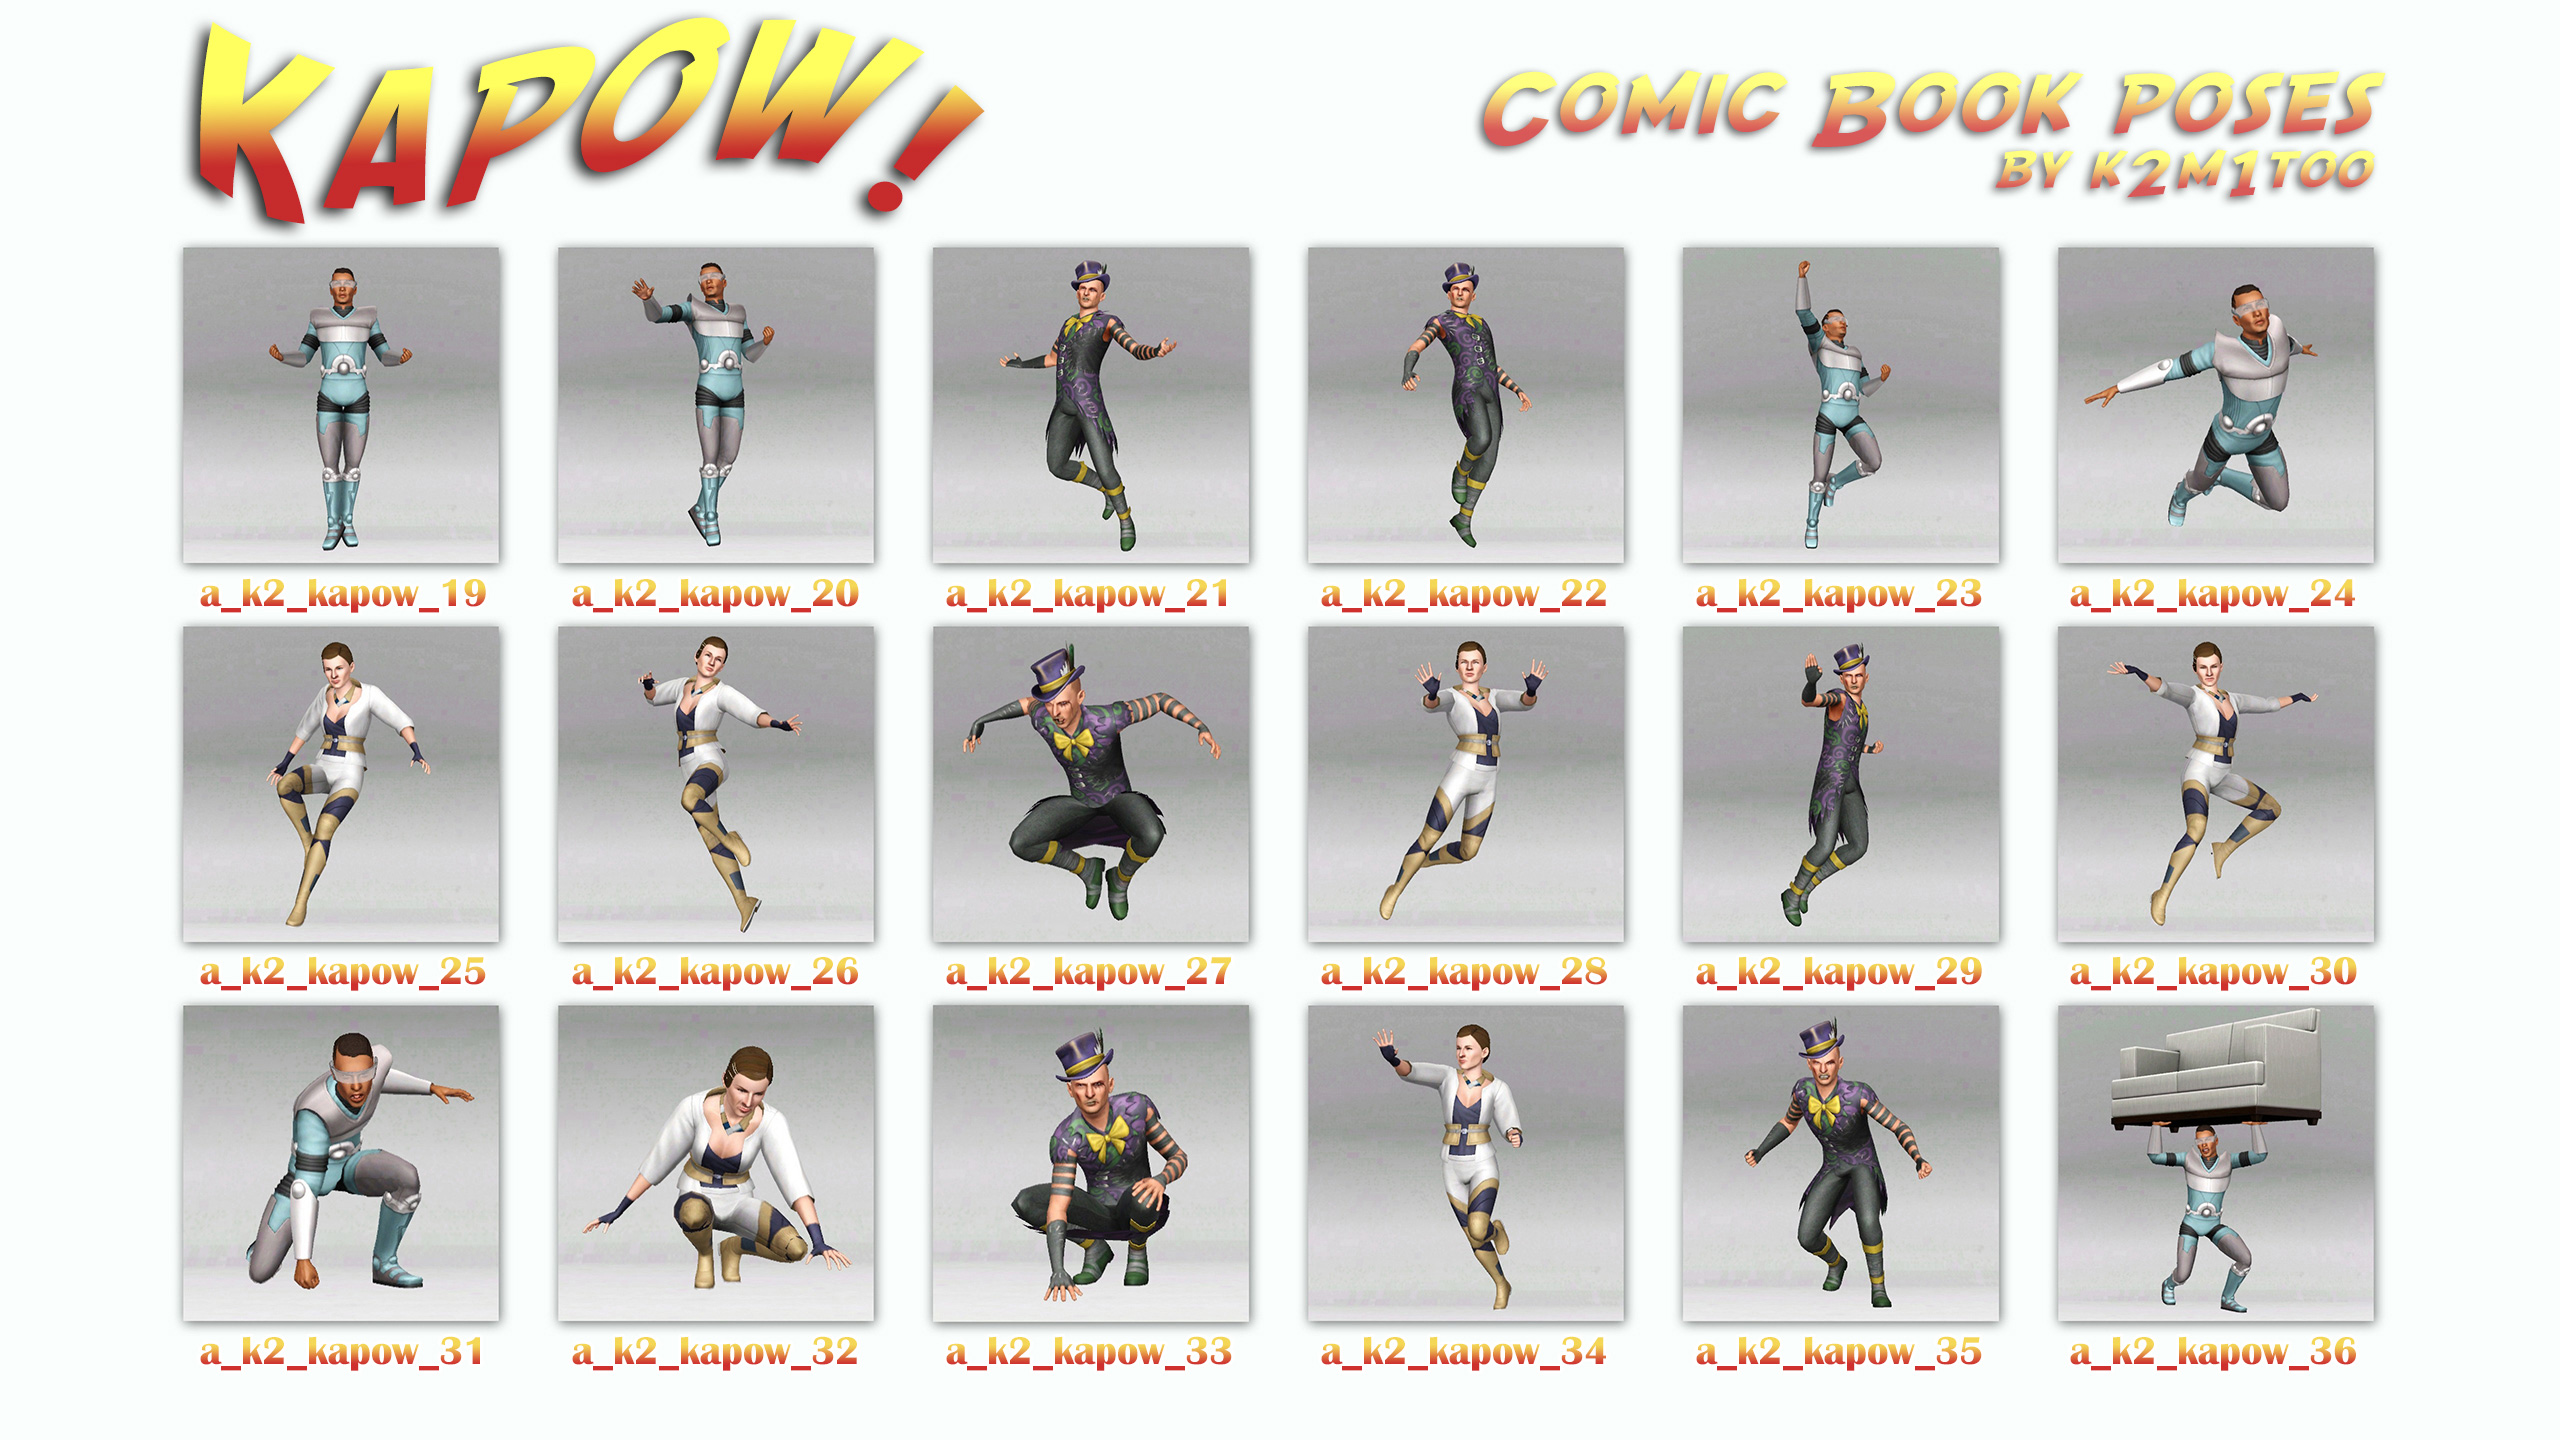 Superman 75 key poses by dusty-abell on DeviantArt